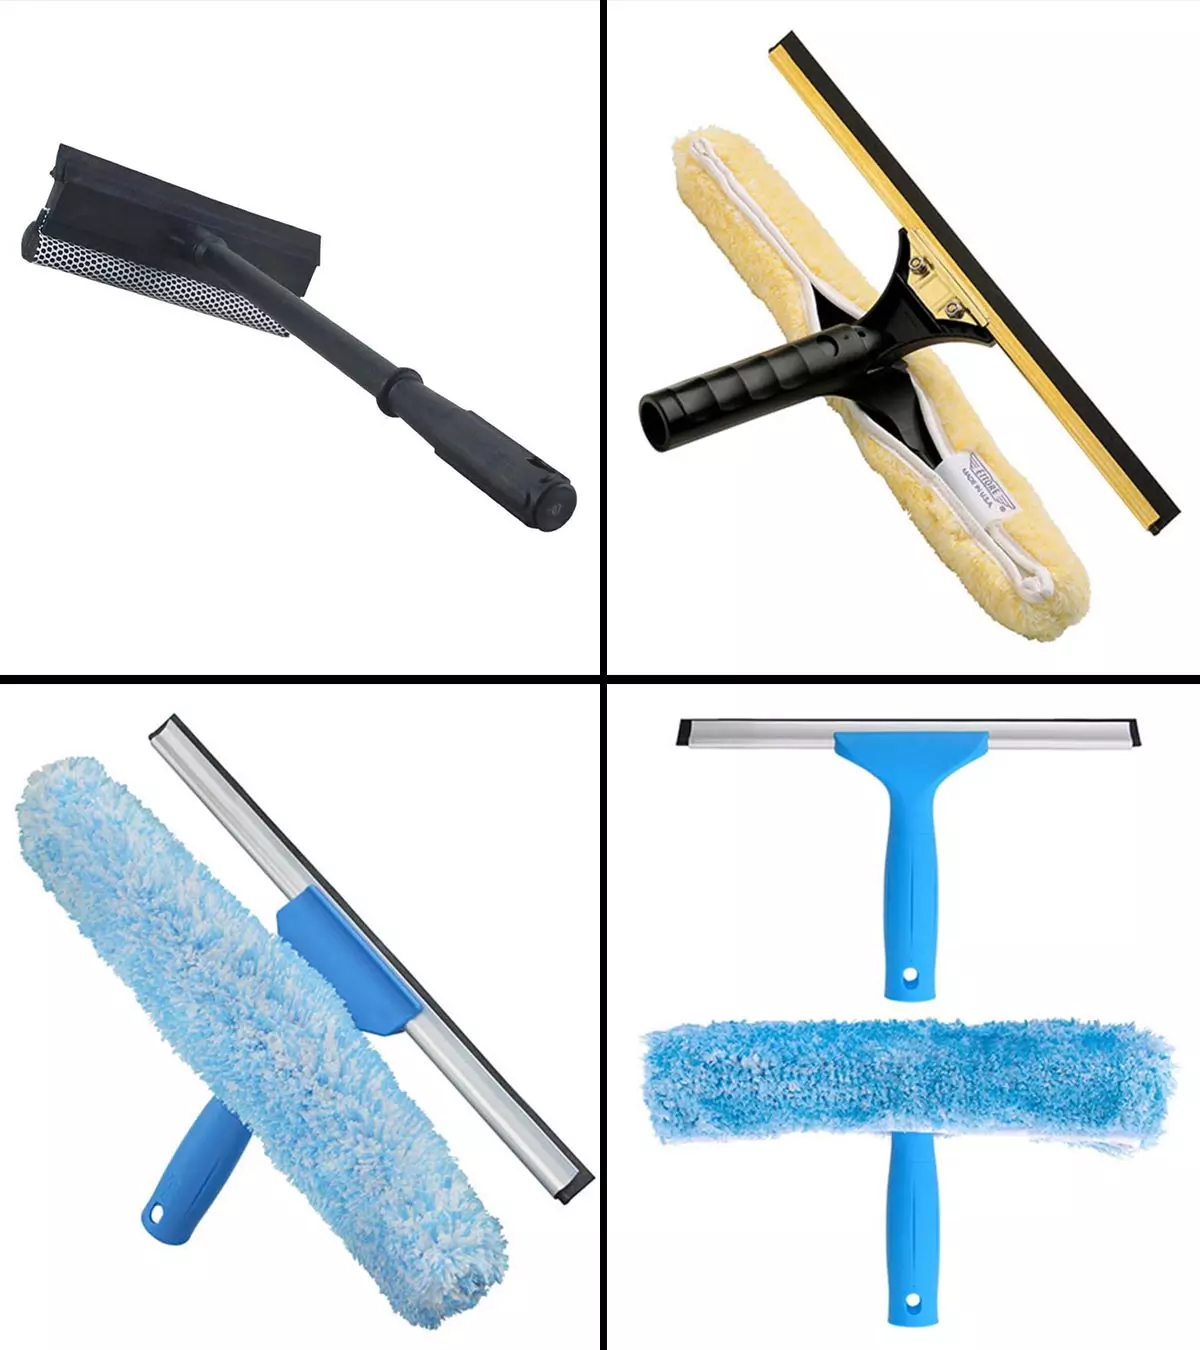 11 Best Window Squeegees For Cleaning In 2021